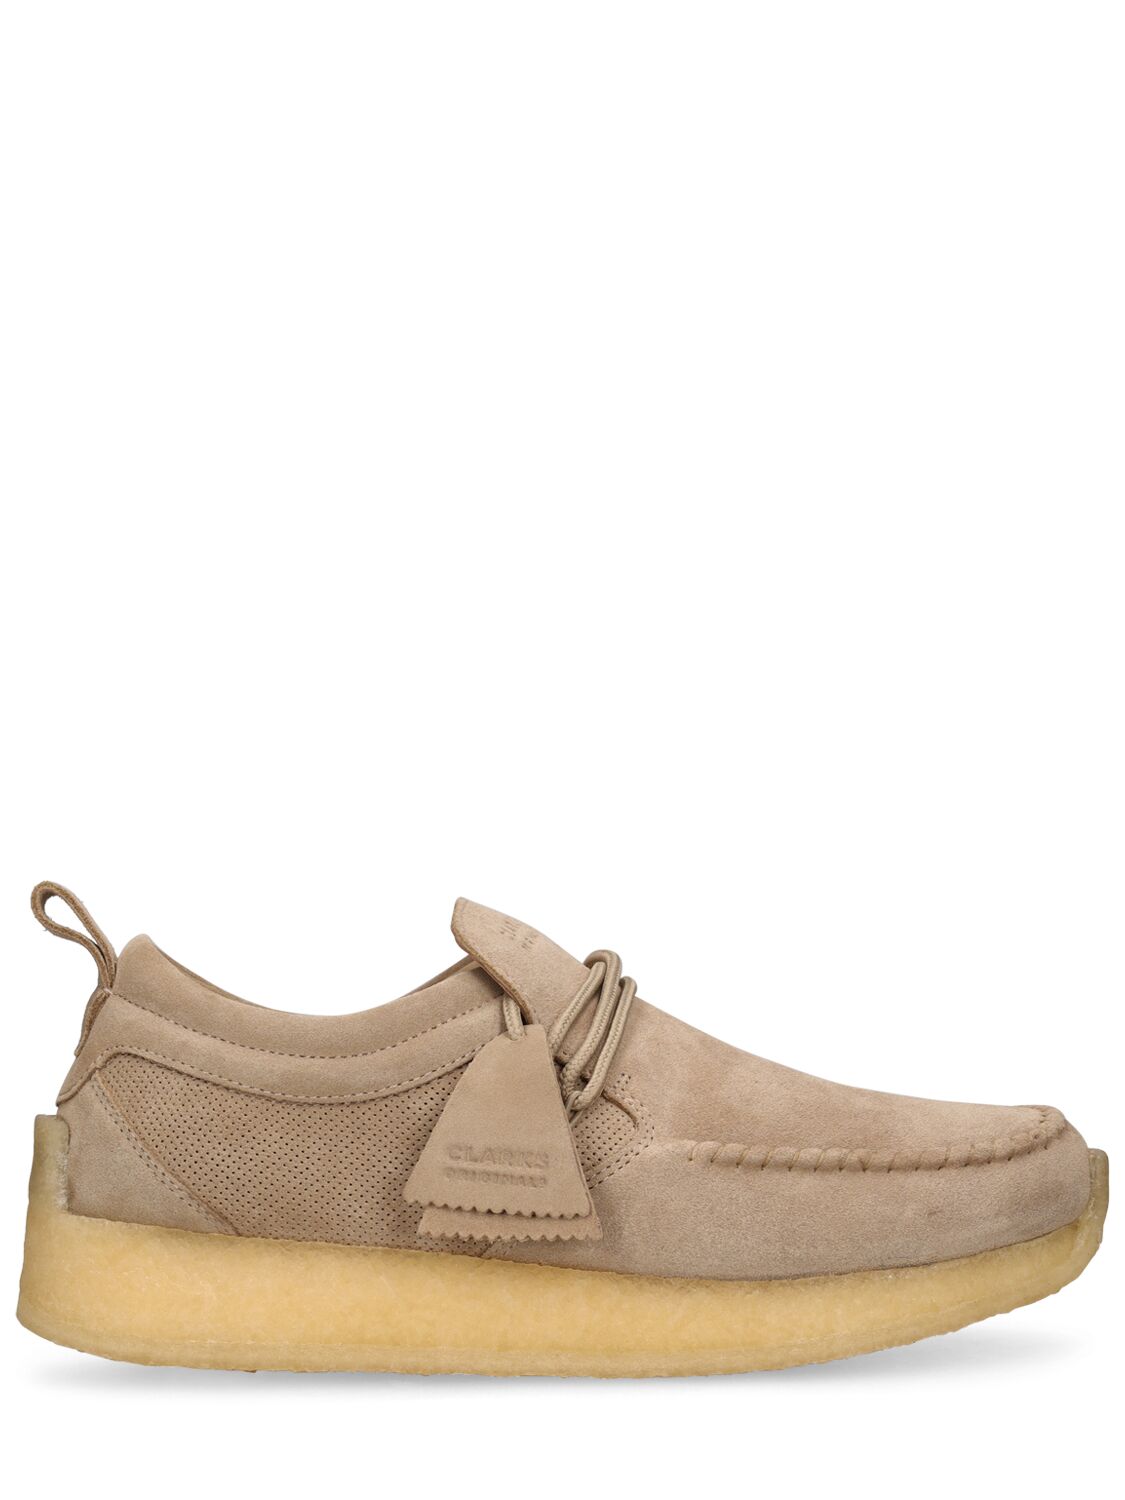 Clarks Originals Maycliffe Suede Lace-up Shoes In Light Sand